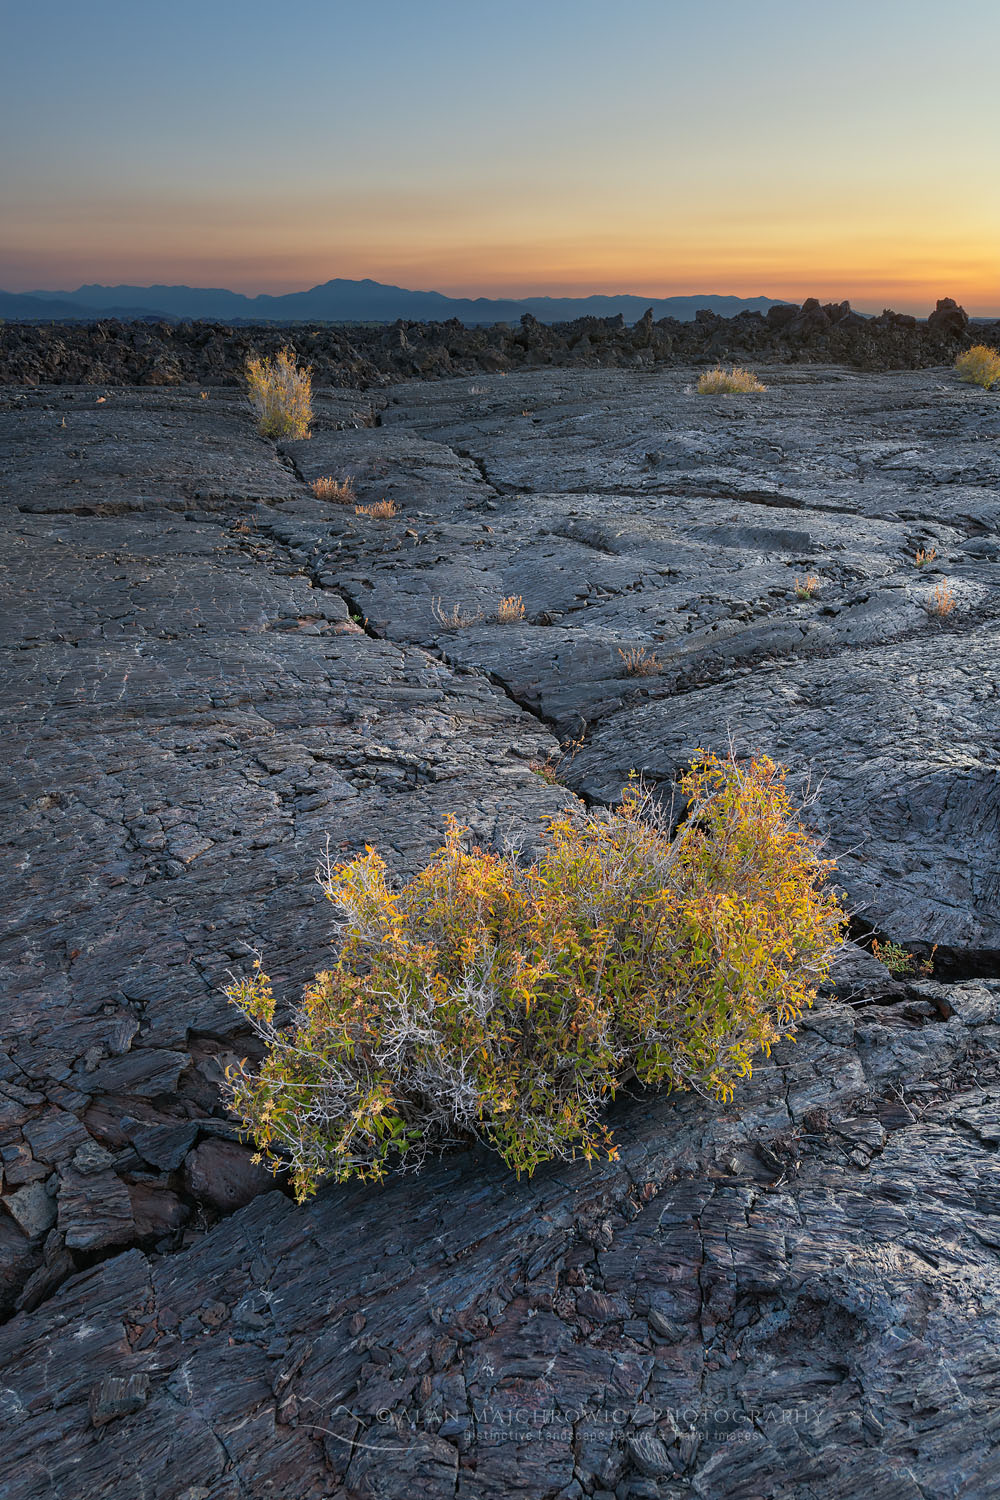 Twilight alpenglow over Blue Dragon Lava Flow, Craters of the Moon National Monument #73949